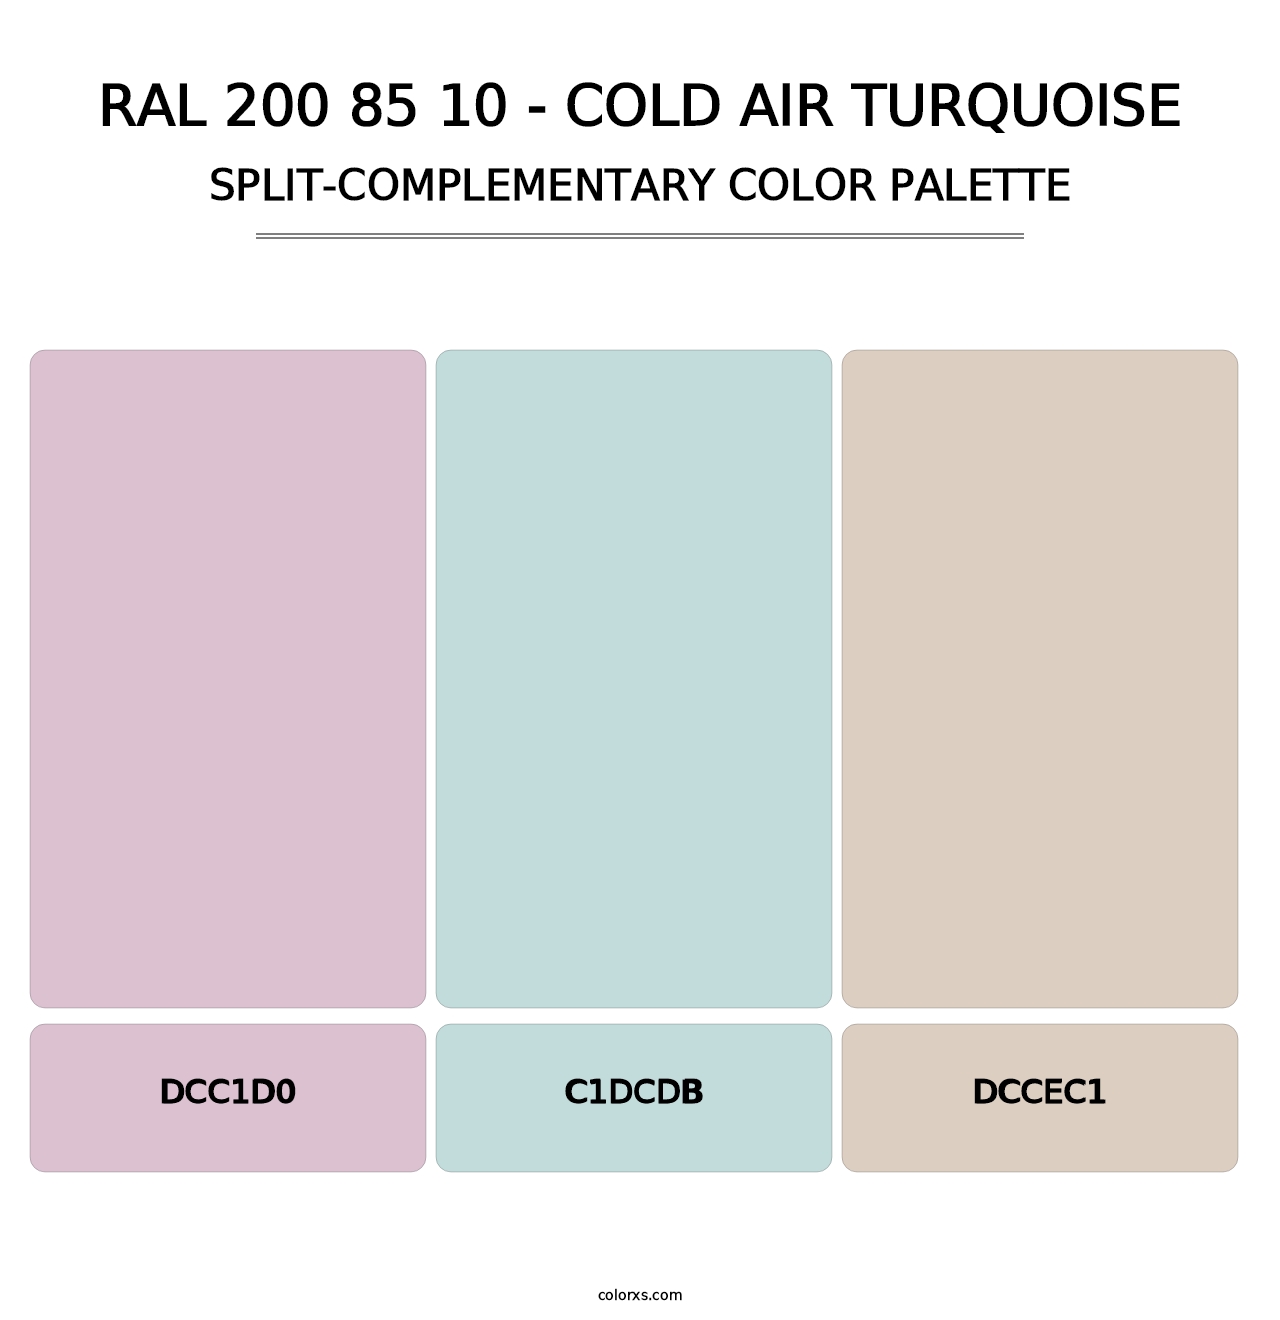 RAL 200 85 10 - Cold Air Turquoise - Split-Complementary Color Palette